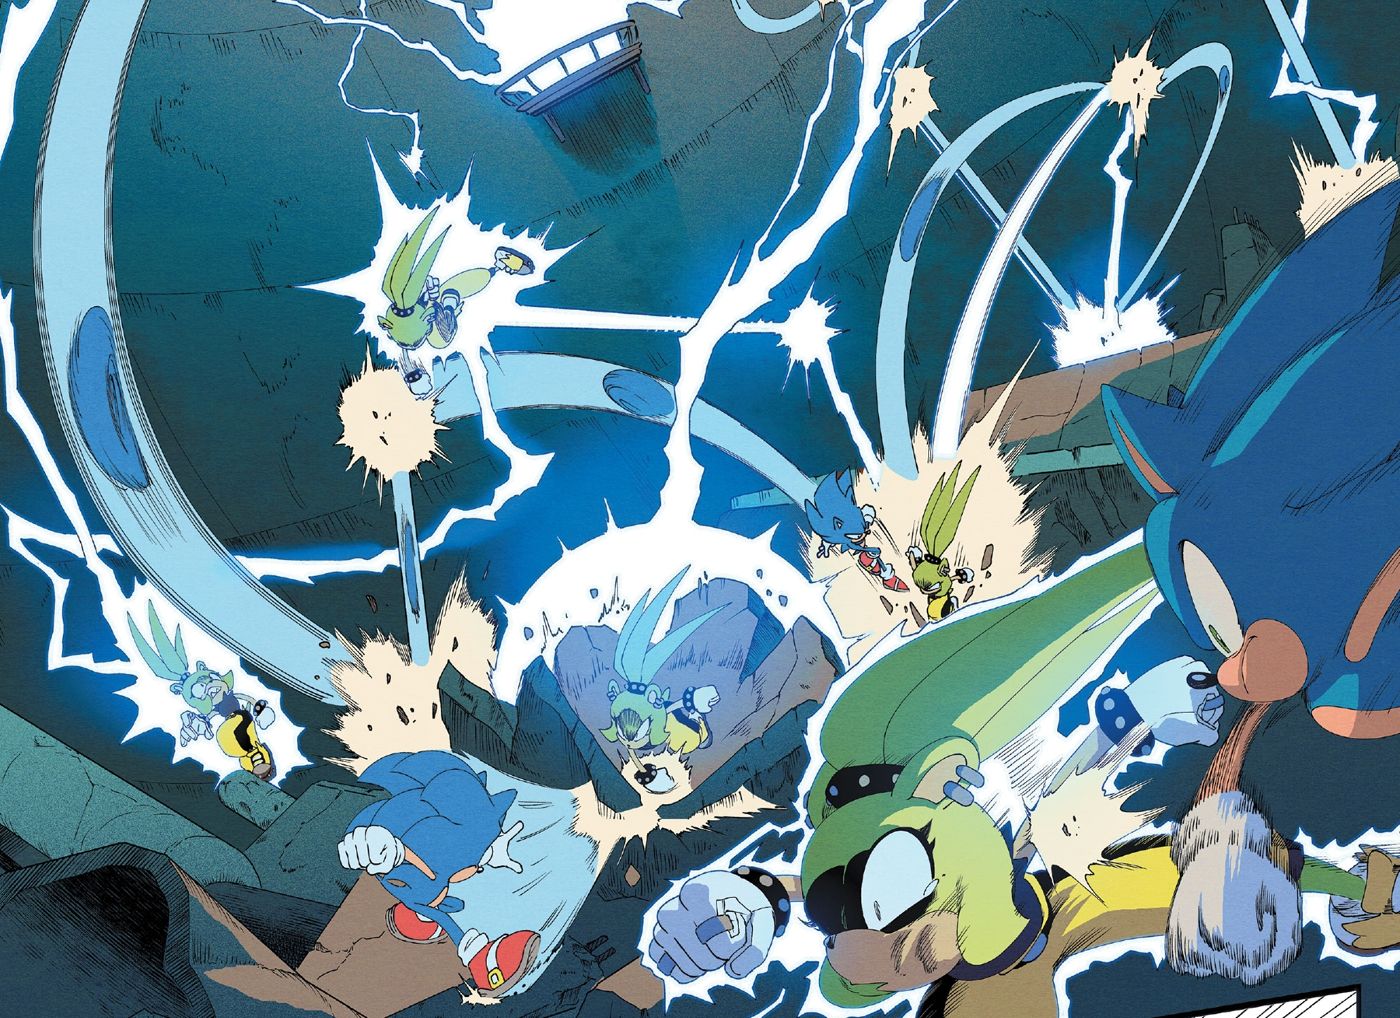 Sonic battles against Surge the Tenrec in Sonic the Hedgehog #50.